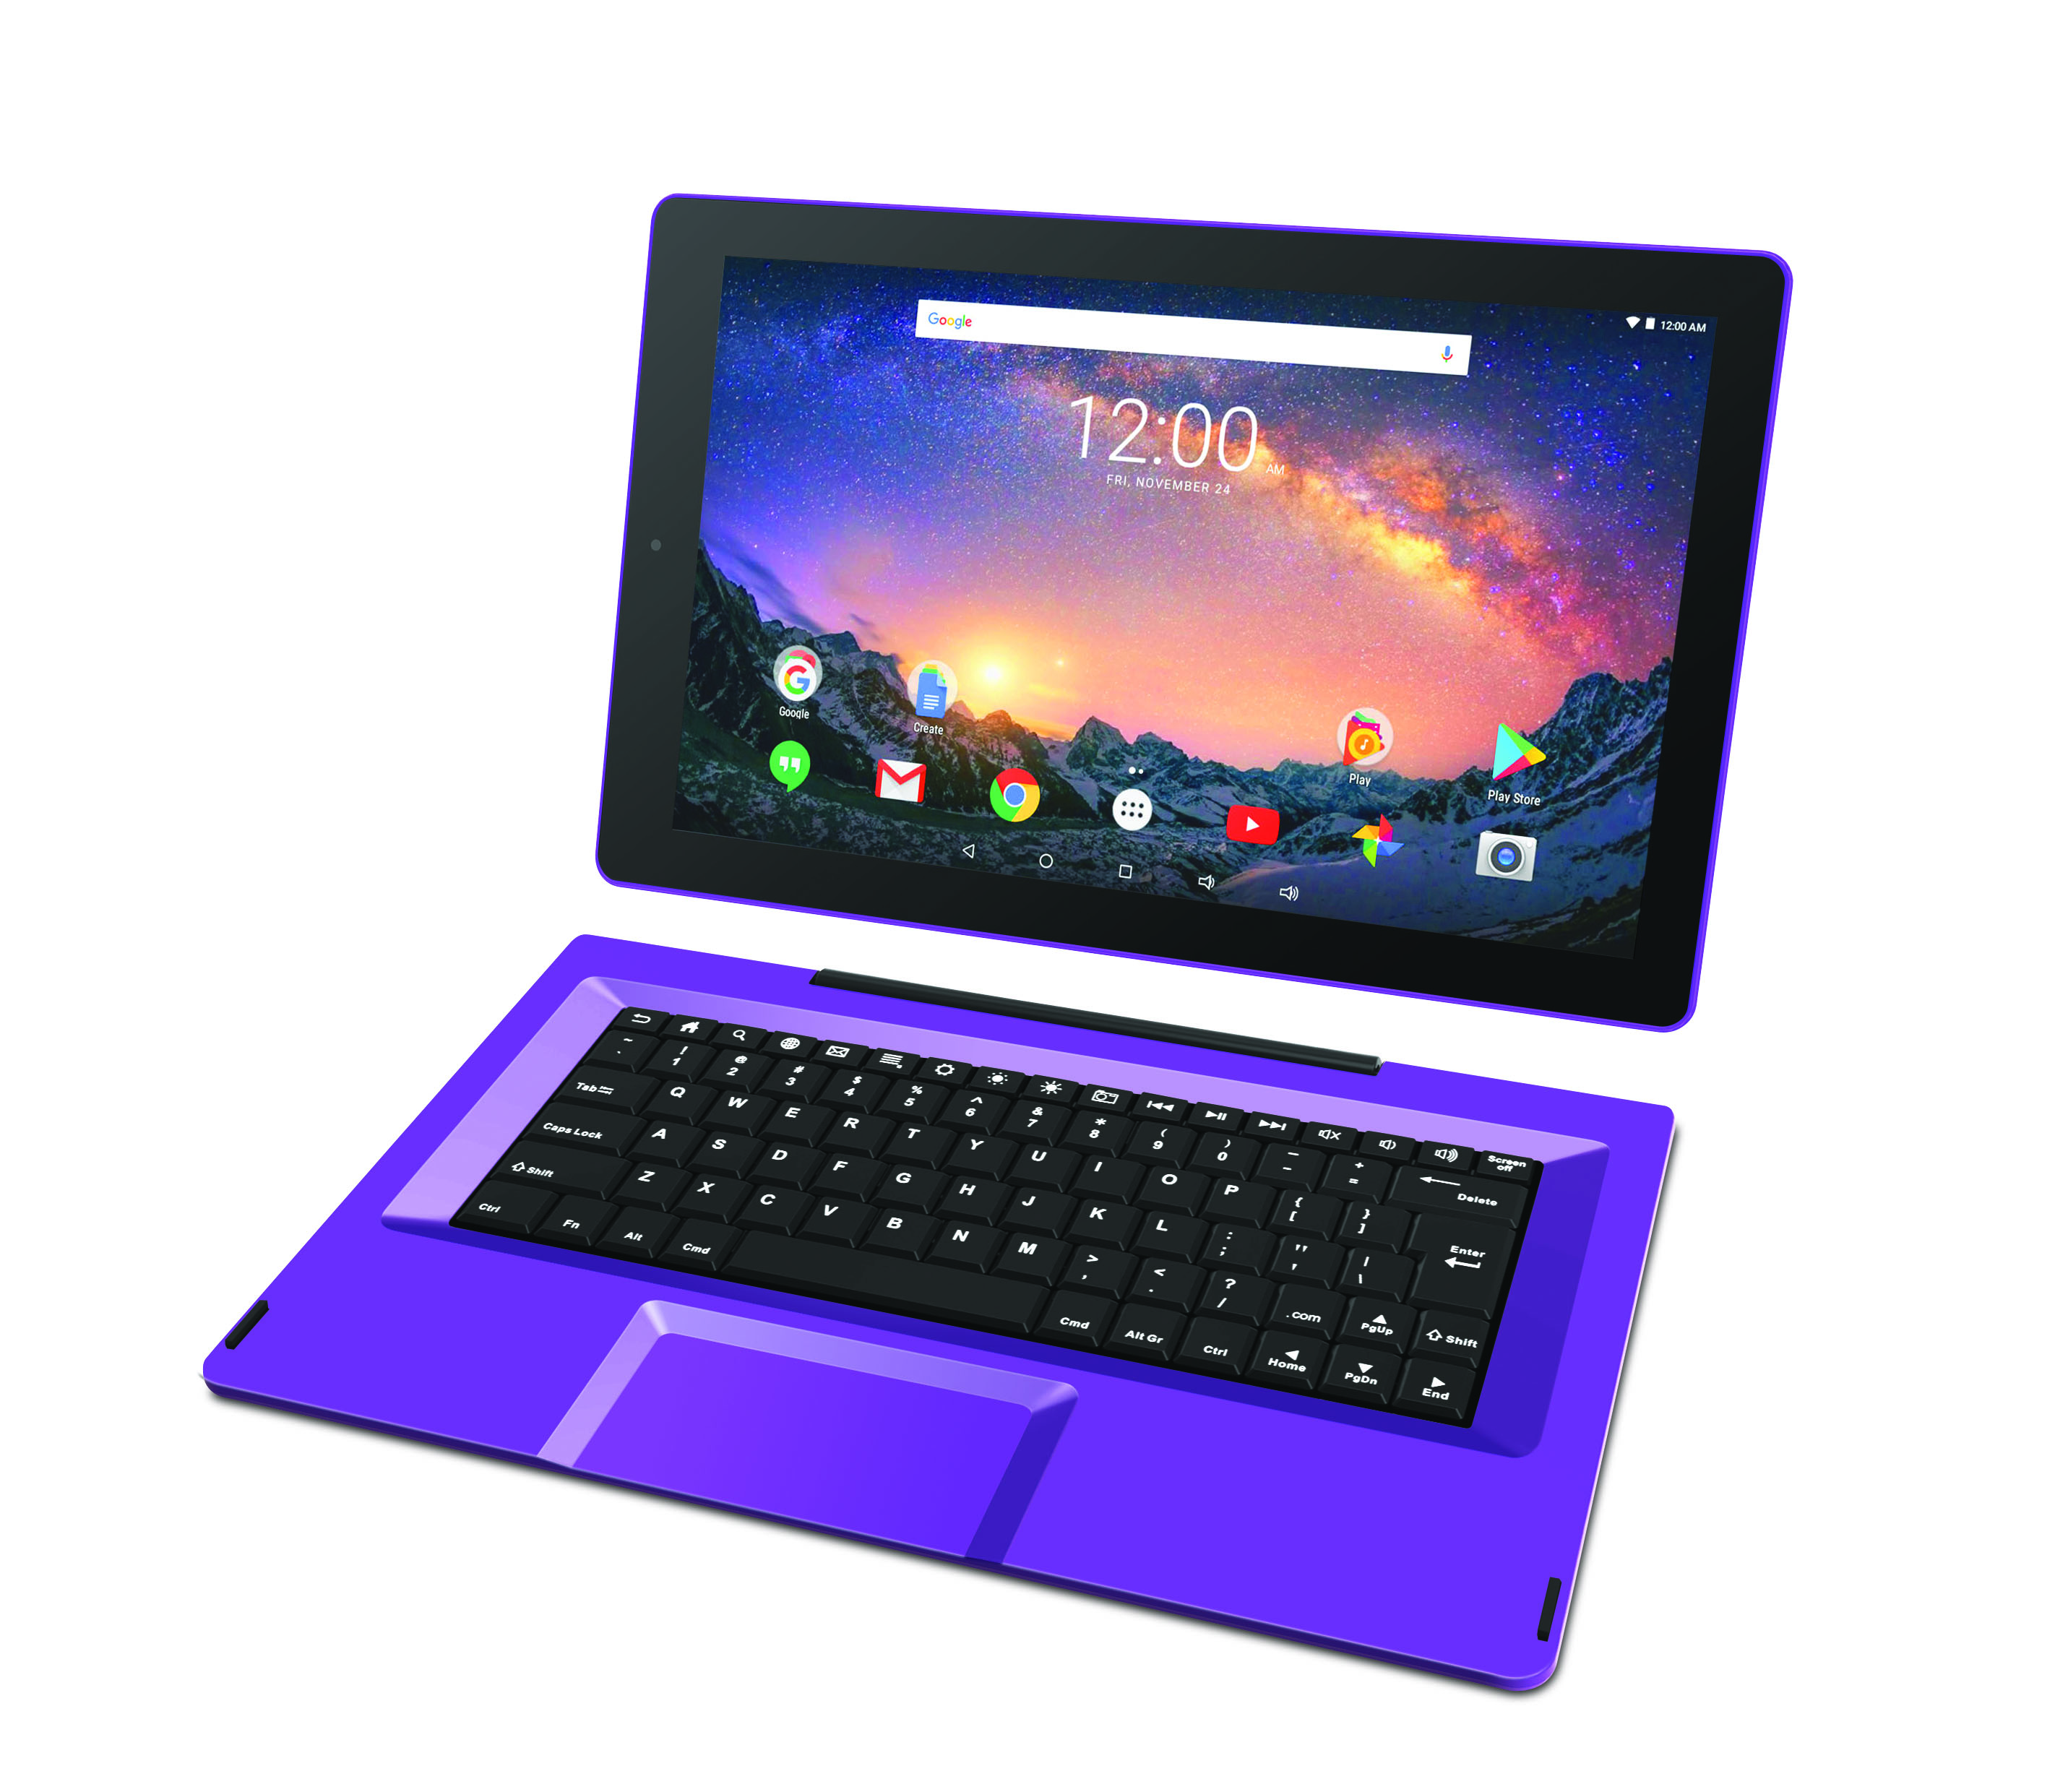 RCA Galileo Pro 11.5" 32GB 2-in-1 Tablet with Keyboard Case Android OS, Purple (Google Classroom Ready) - image 2 of 5